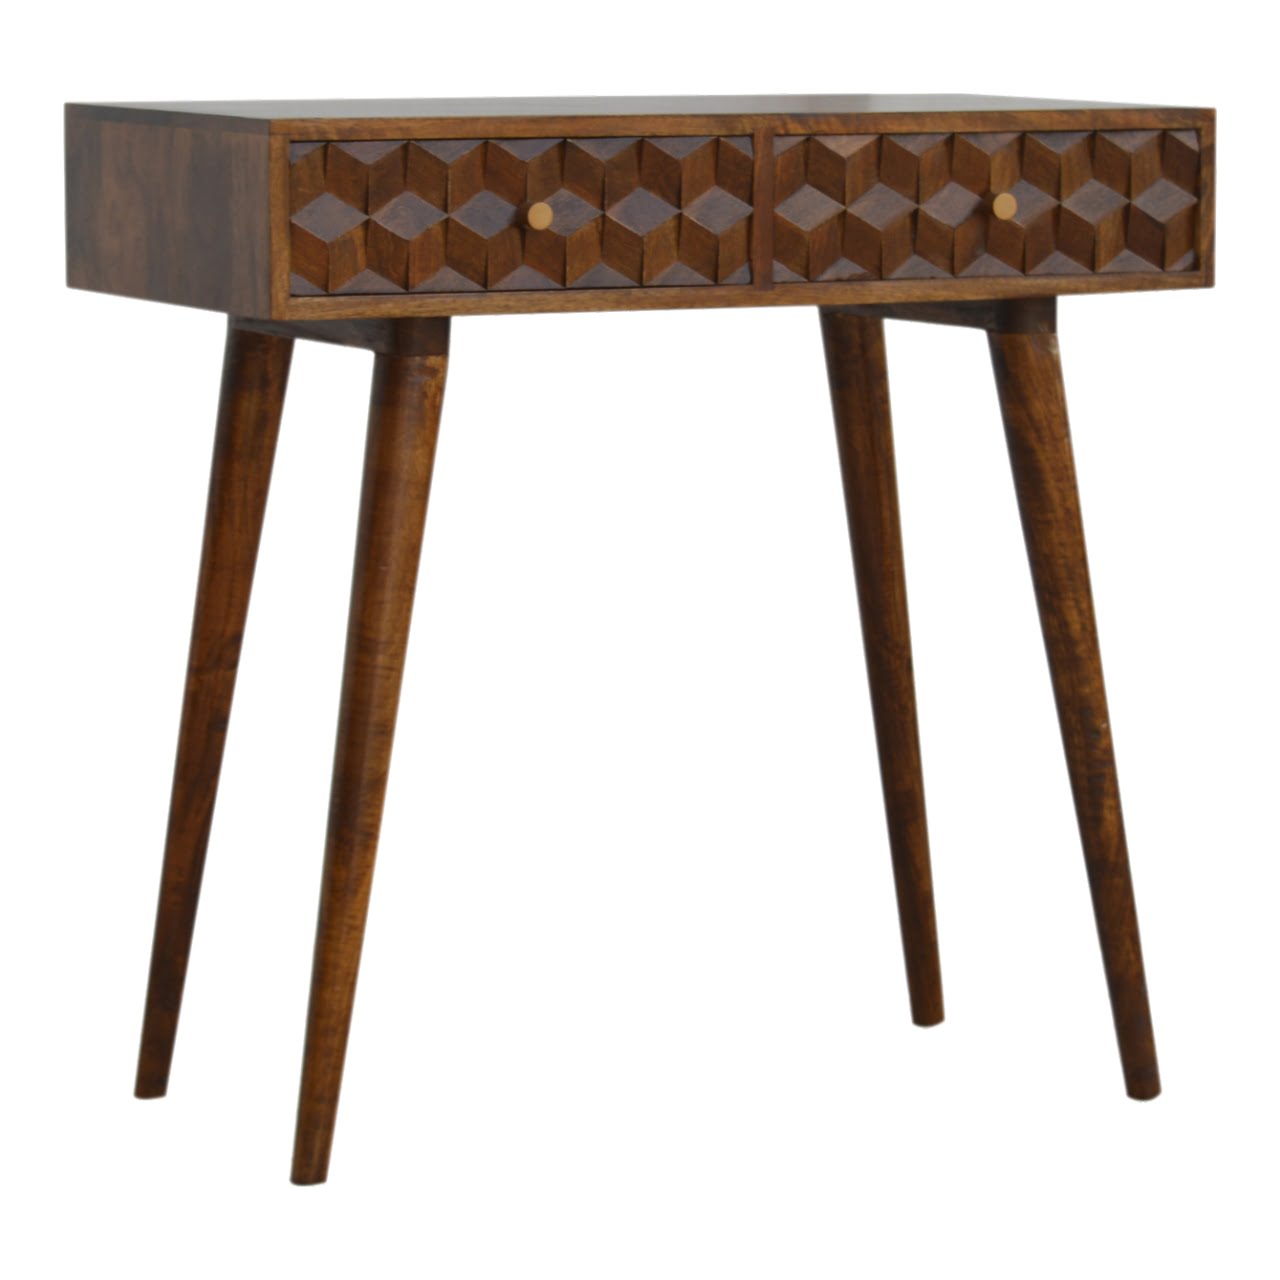 View Chestnut Cube Console Table information